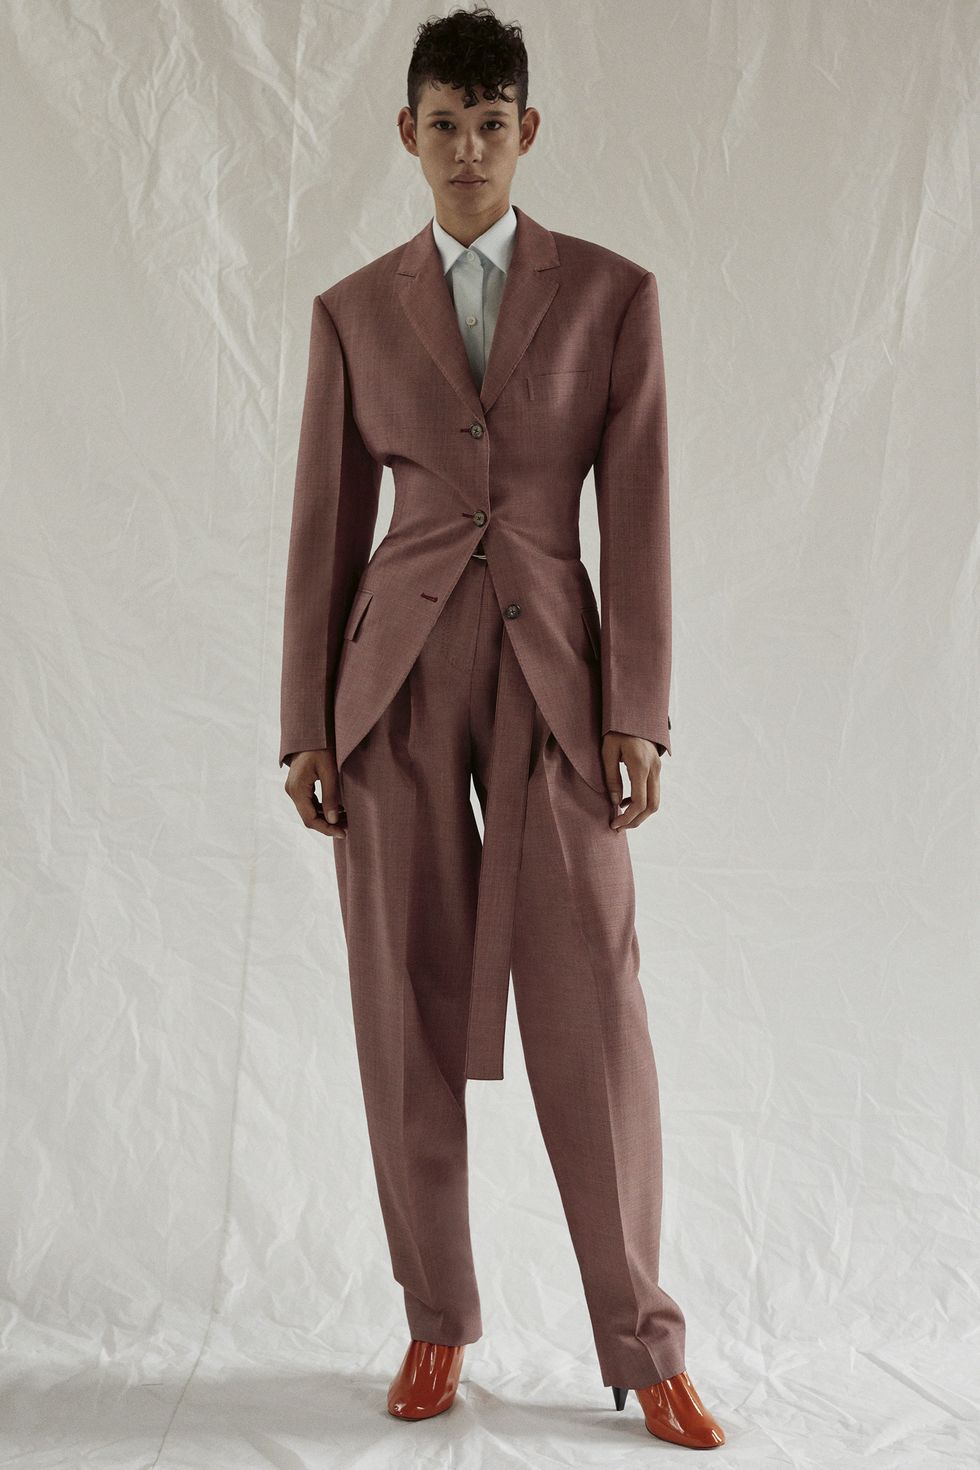 Dress shirt, Brown, Collar, Coat, Sleeve, Trousers, Suit trousers, Shoulder, Joint, Outerwear, 